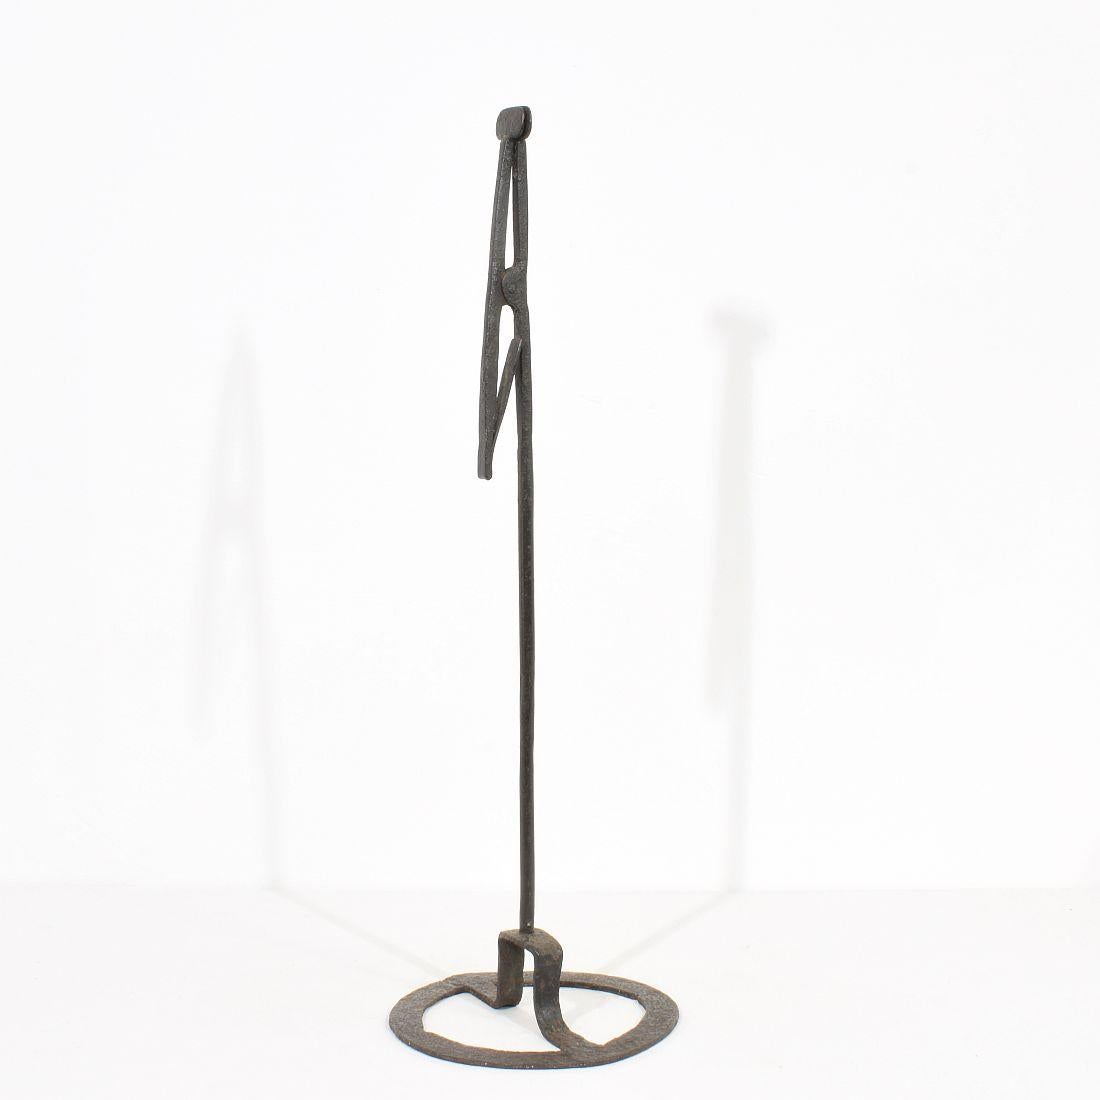 Very old and beautiful hand forged iron candleholder.
France, circa 1700-1750. Weathered.